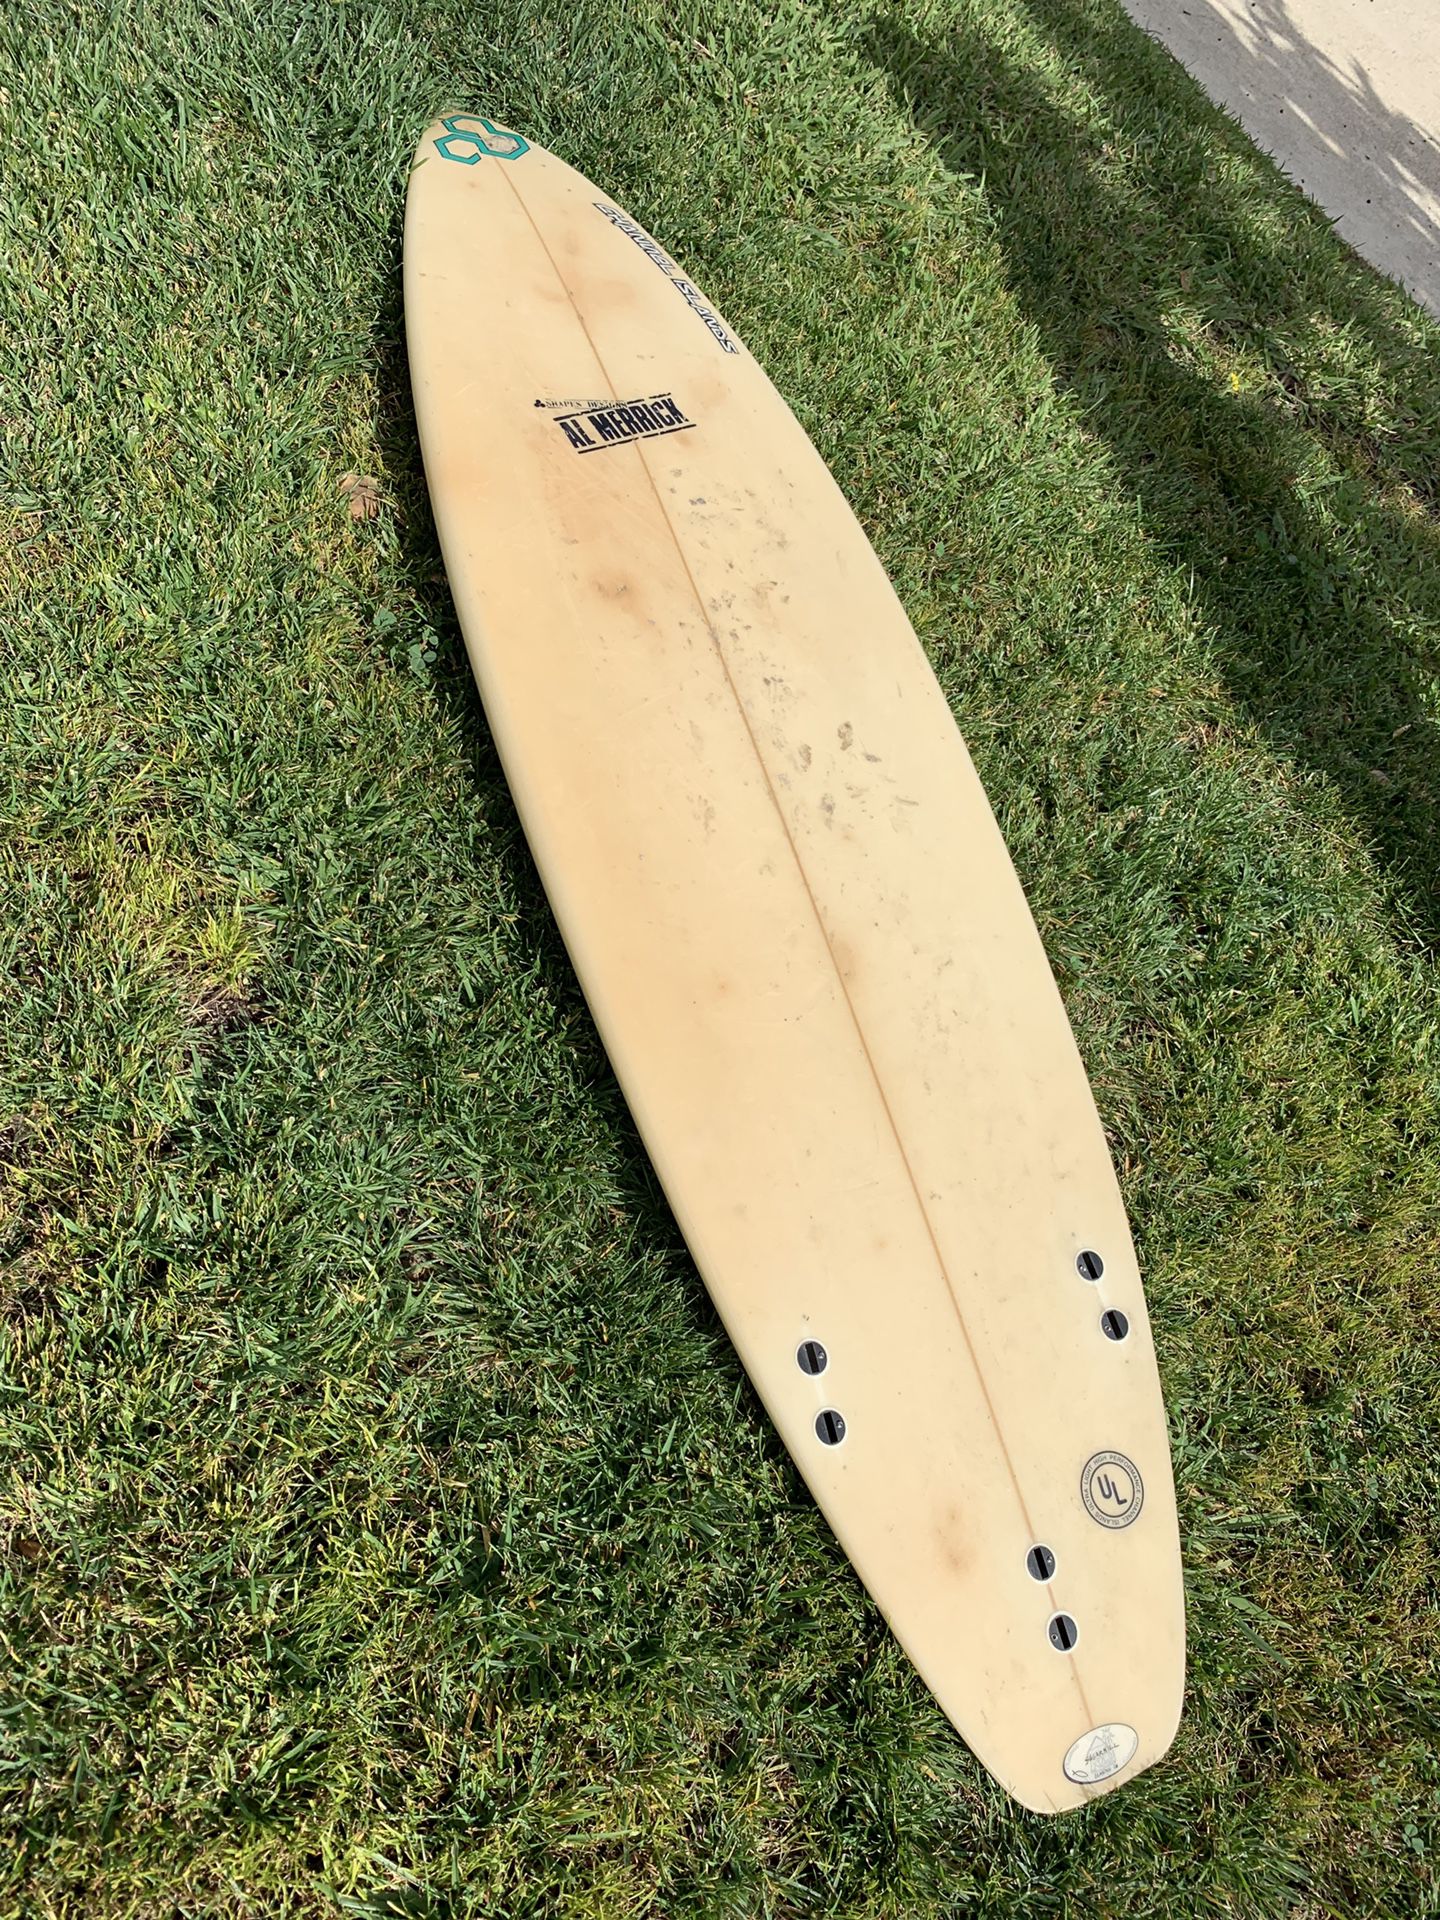 Surfboard: Channel Islands 6’5” short board no fins, 2.5 inches thick